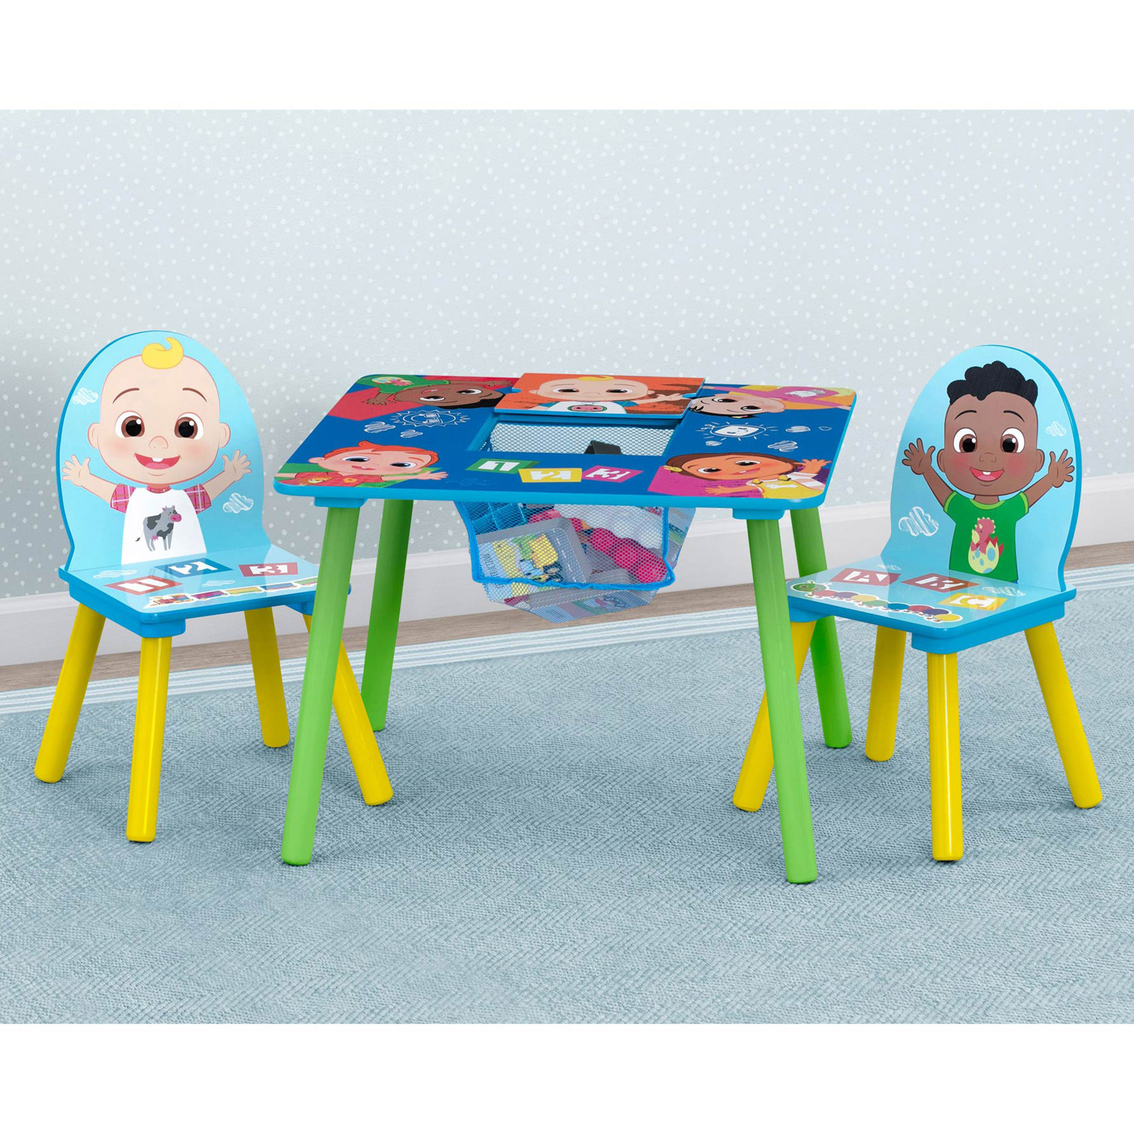 Delta Children CoComelon Table and Chair Set - Image 5 of 5